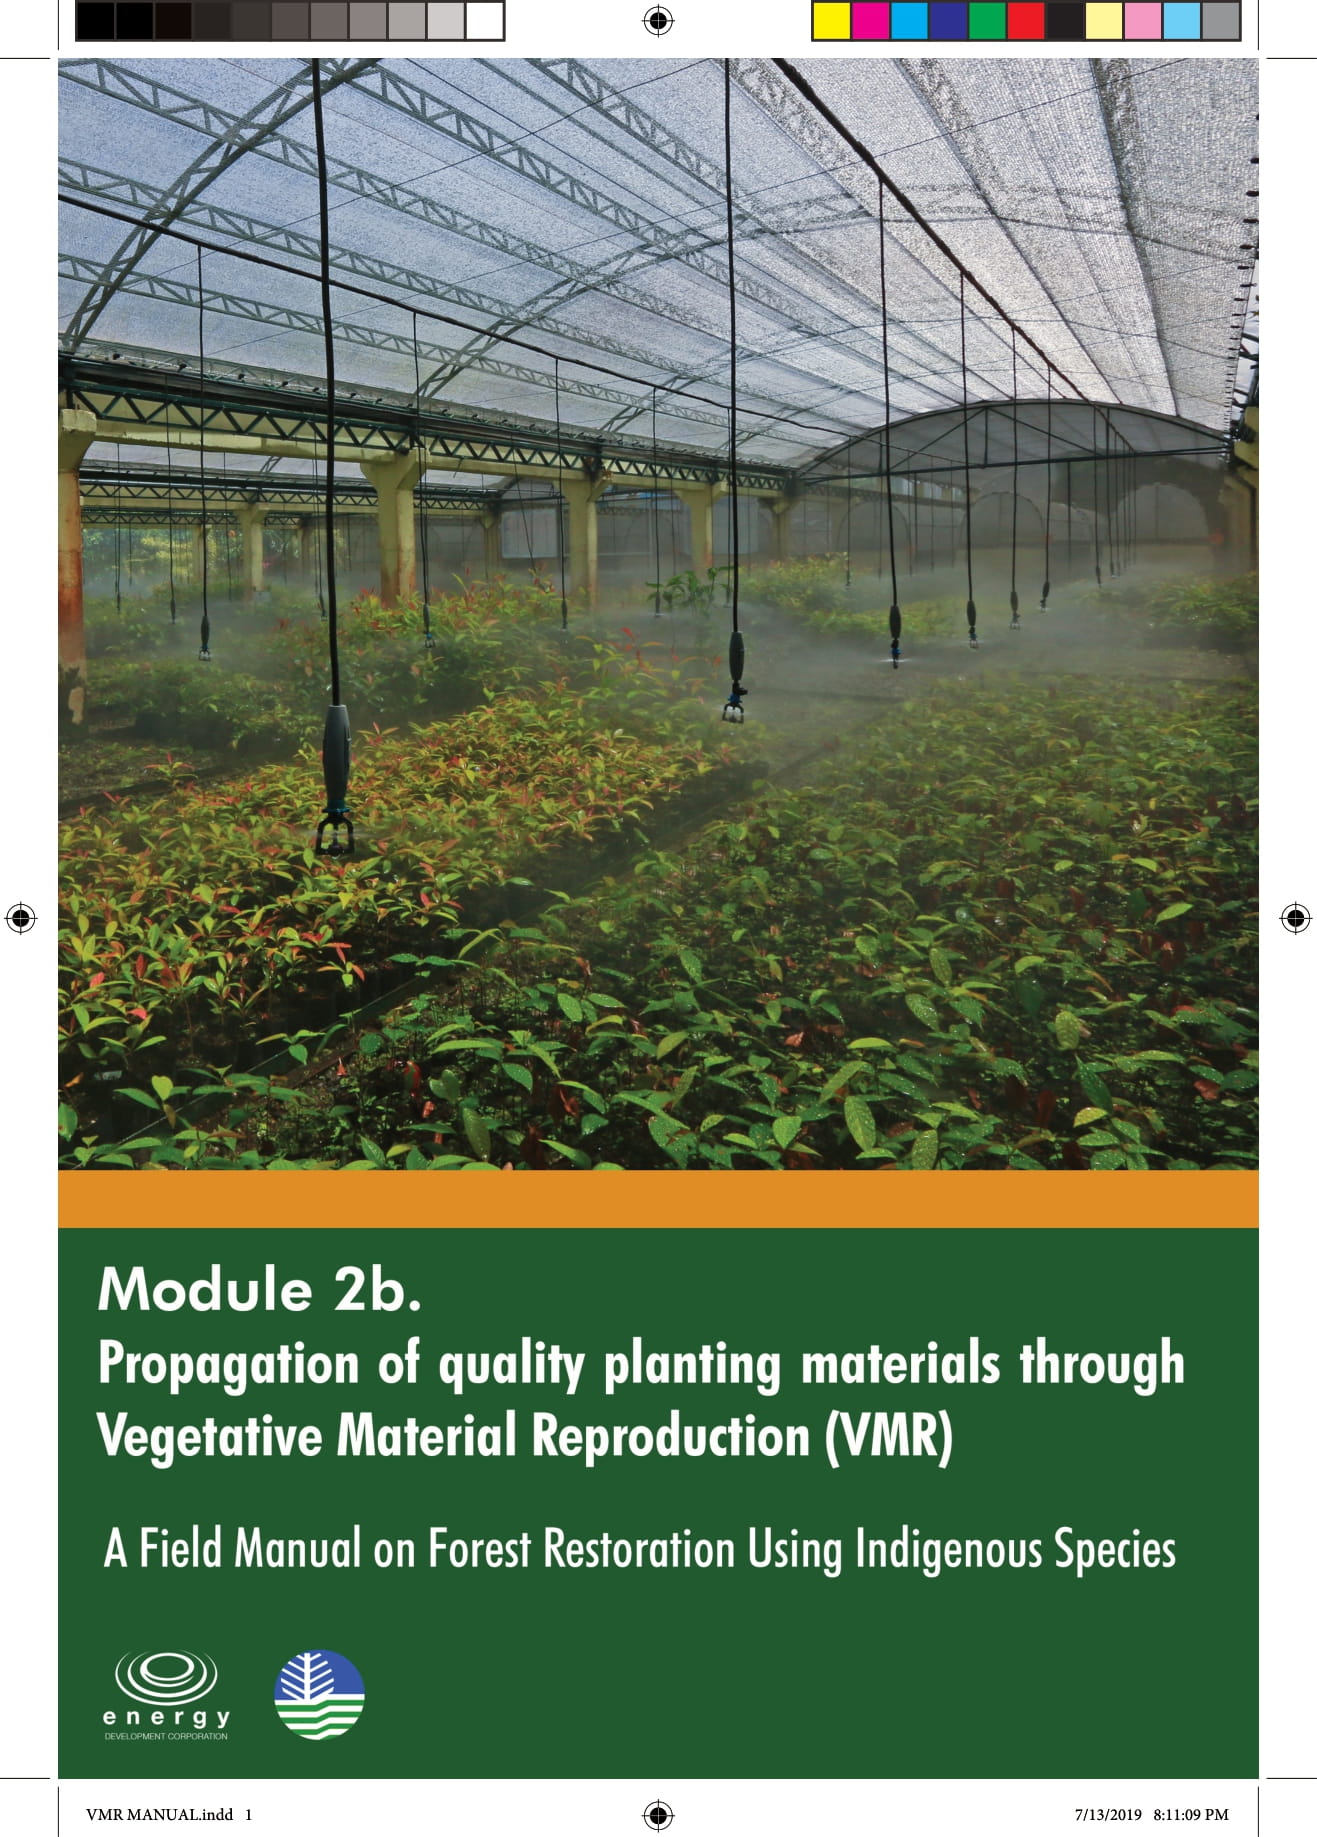 Copy of Copy of 2019 Forest Restoration Manual - Module 2b Production through VMR-01